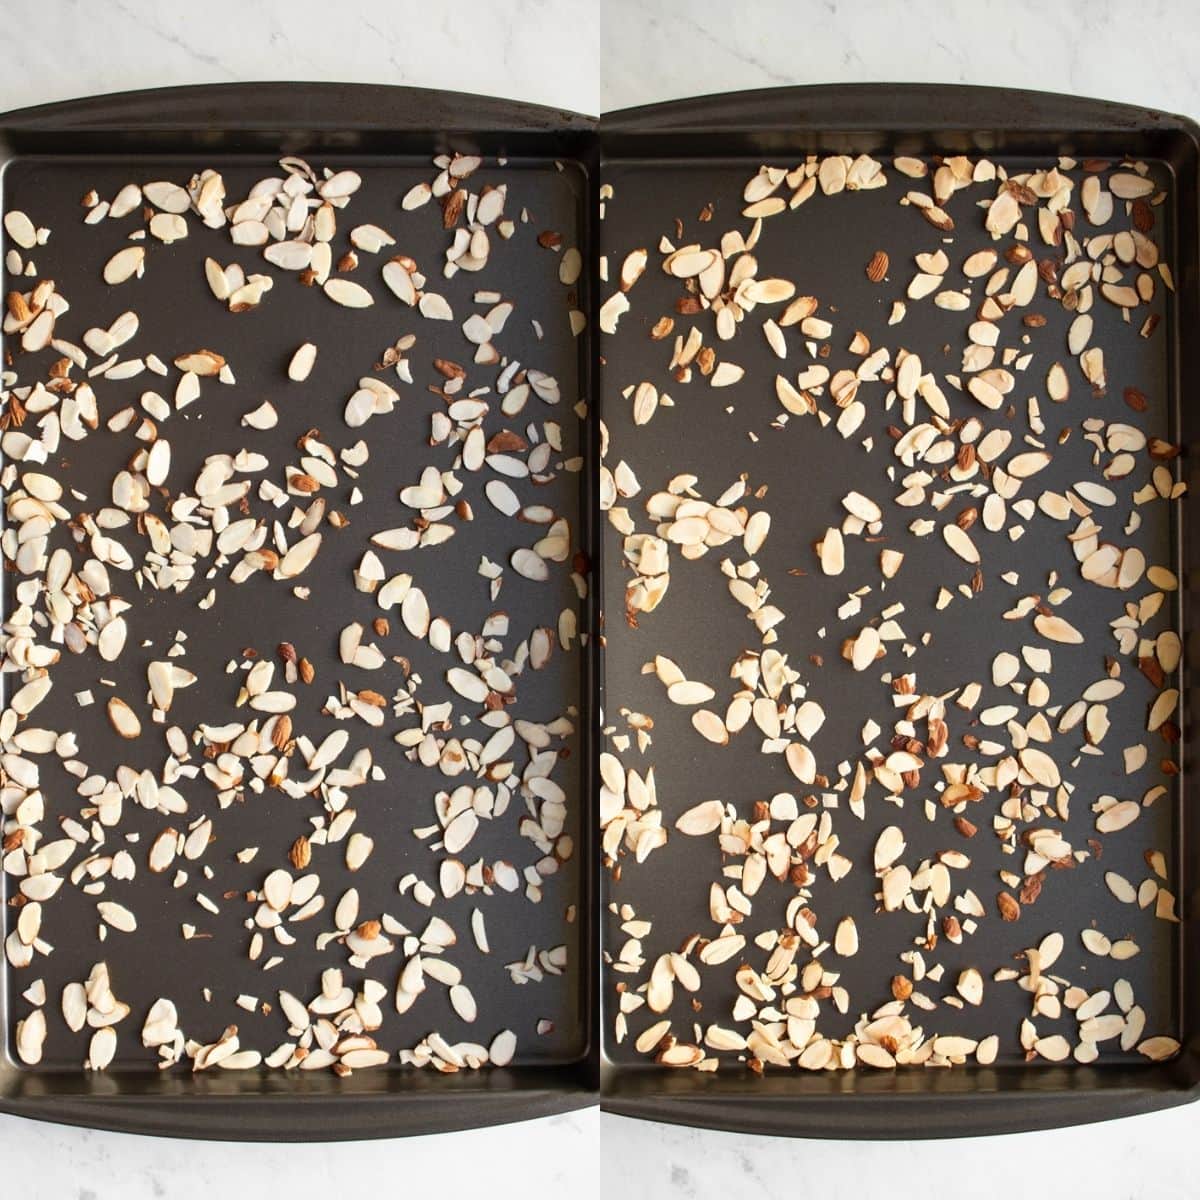 Two images in one photo. On the left is a sheet pan with untoasted sliced almonds. On the right is the same sheet pan with toasted sliced almonds.